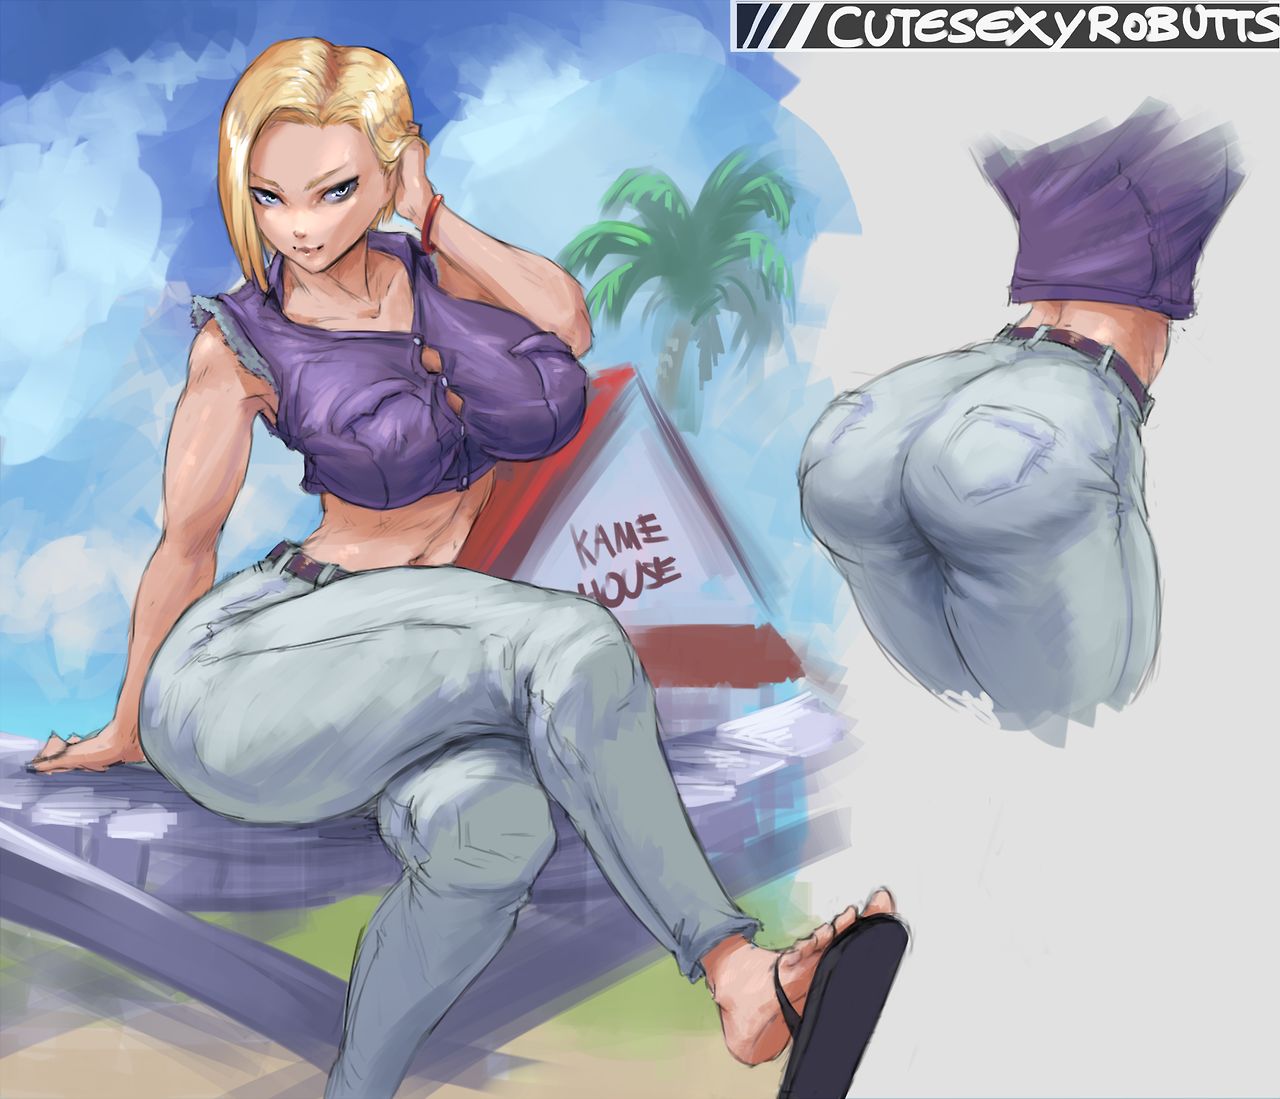 358_Cutesexyrobutts_566000_Android_18.jpg.